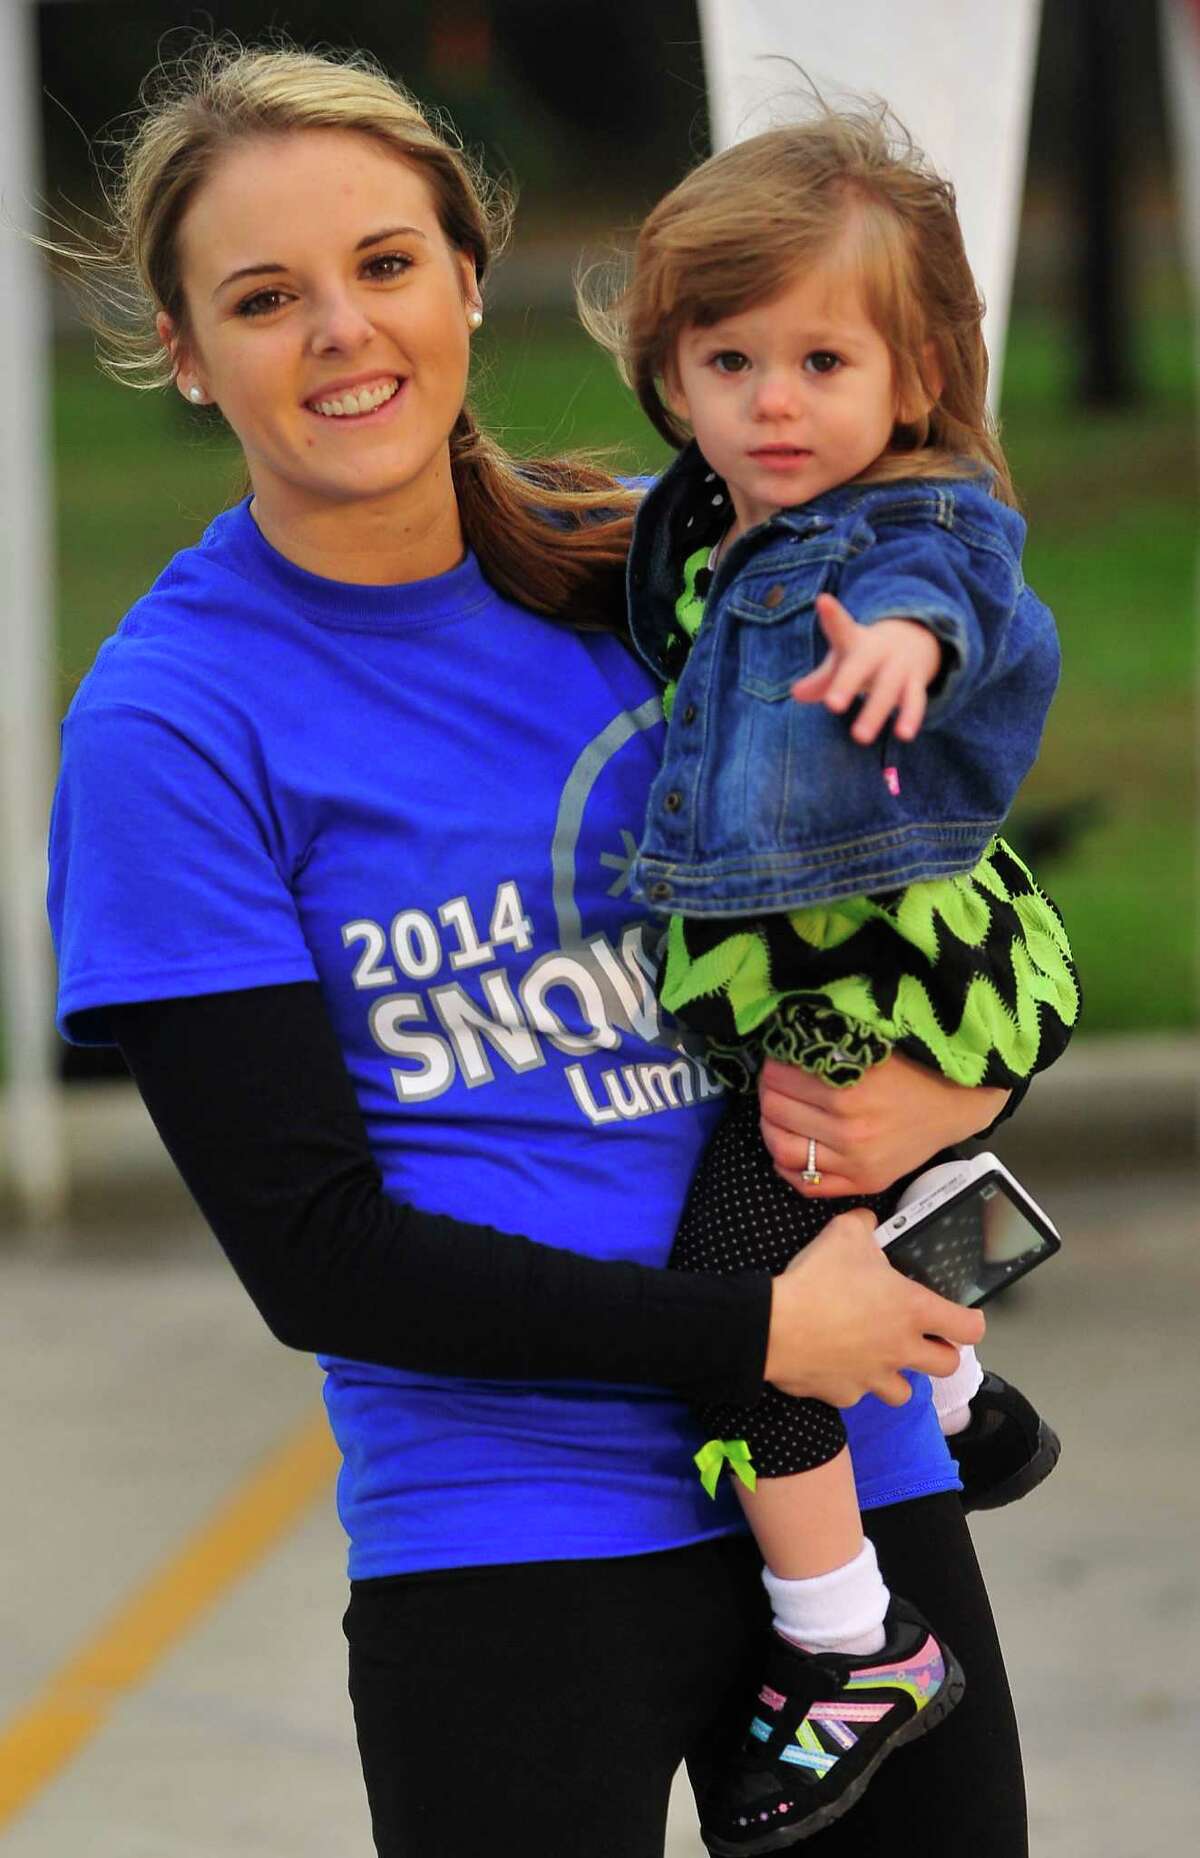 The Snow Run & Walk 5K was held Saturday at the Lumberton City Park. Proceeds from the event went toward the nonprofit charity Ulcerative Colitis Foundation of American, which raises funds for scholarships for those affected by the disease. Photo by Cassie Smith/@smithcassie. March 29, 2014.